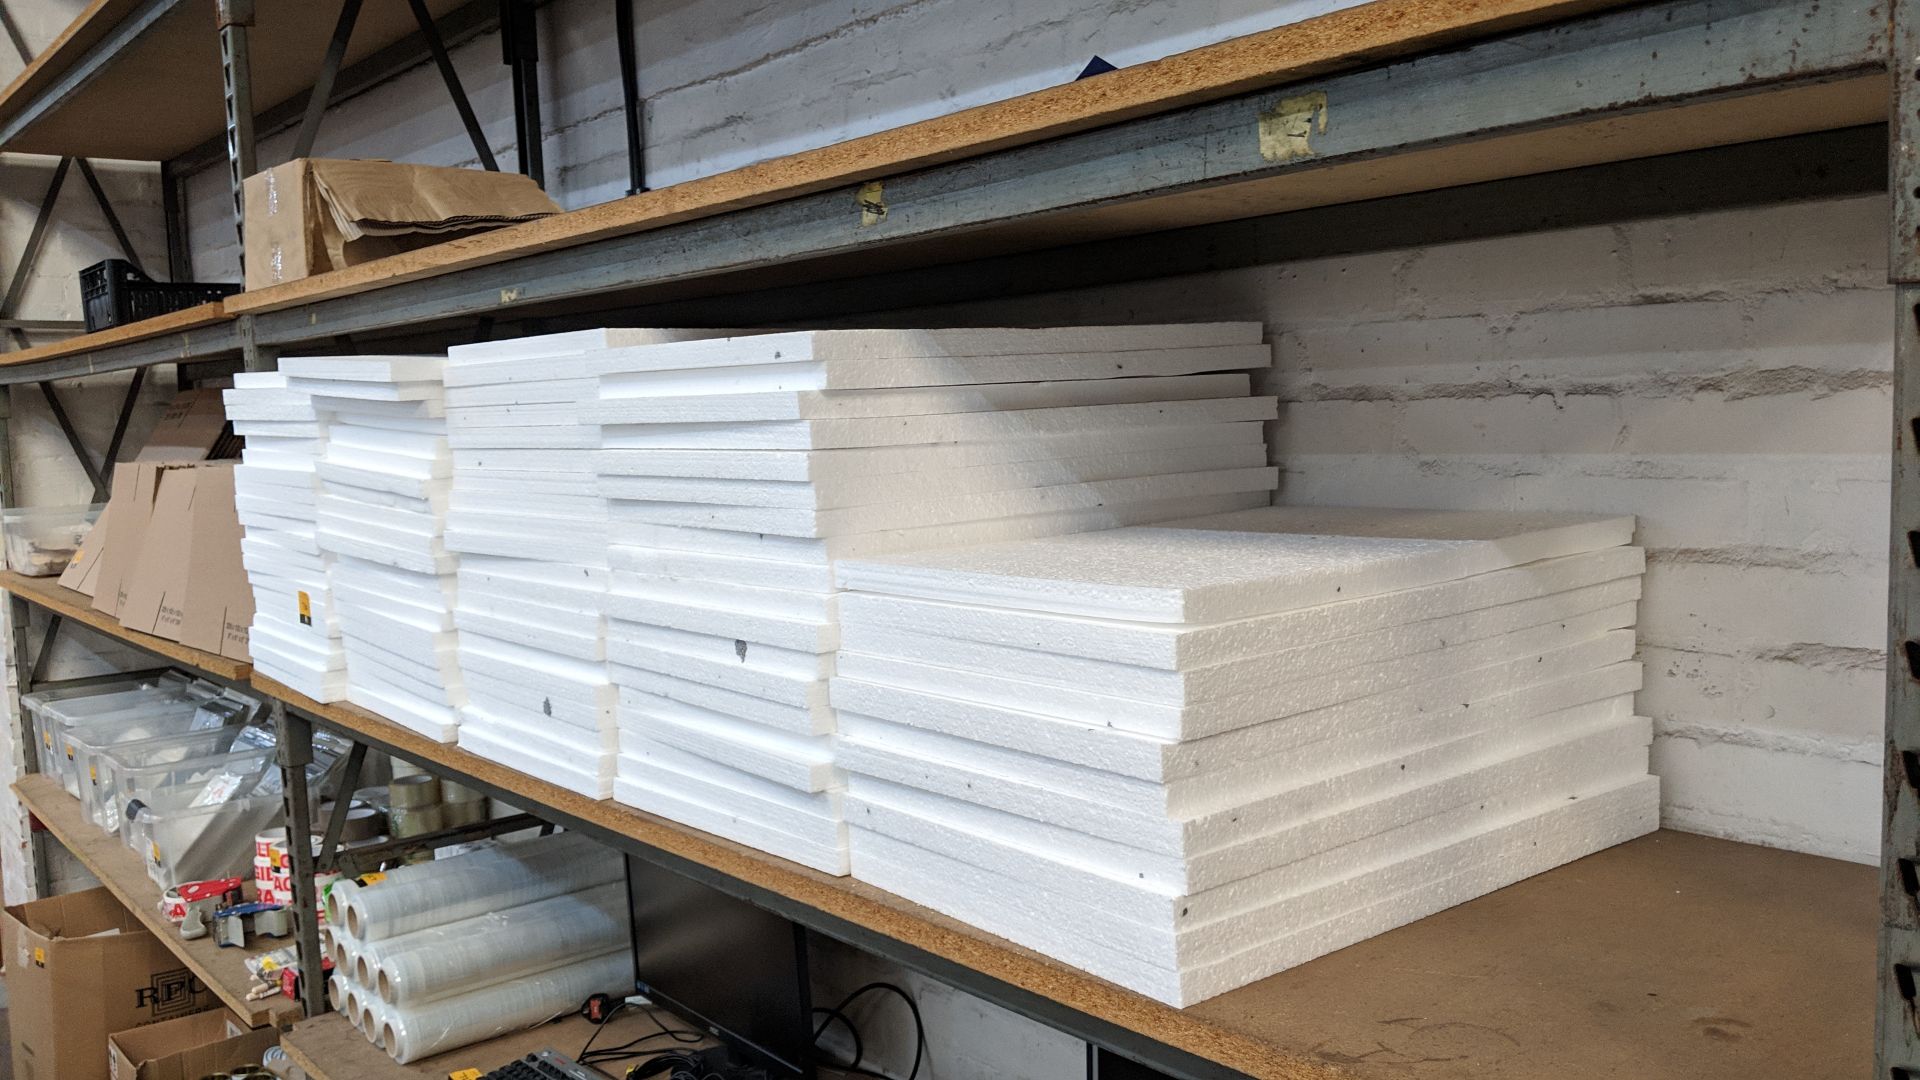 The contents of a bay of polystyrene sheets, in 5 stacks, each sheet measuring approximately 600mm x - Image 4 of 4